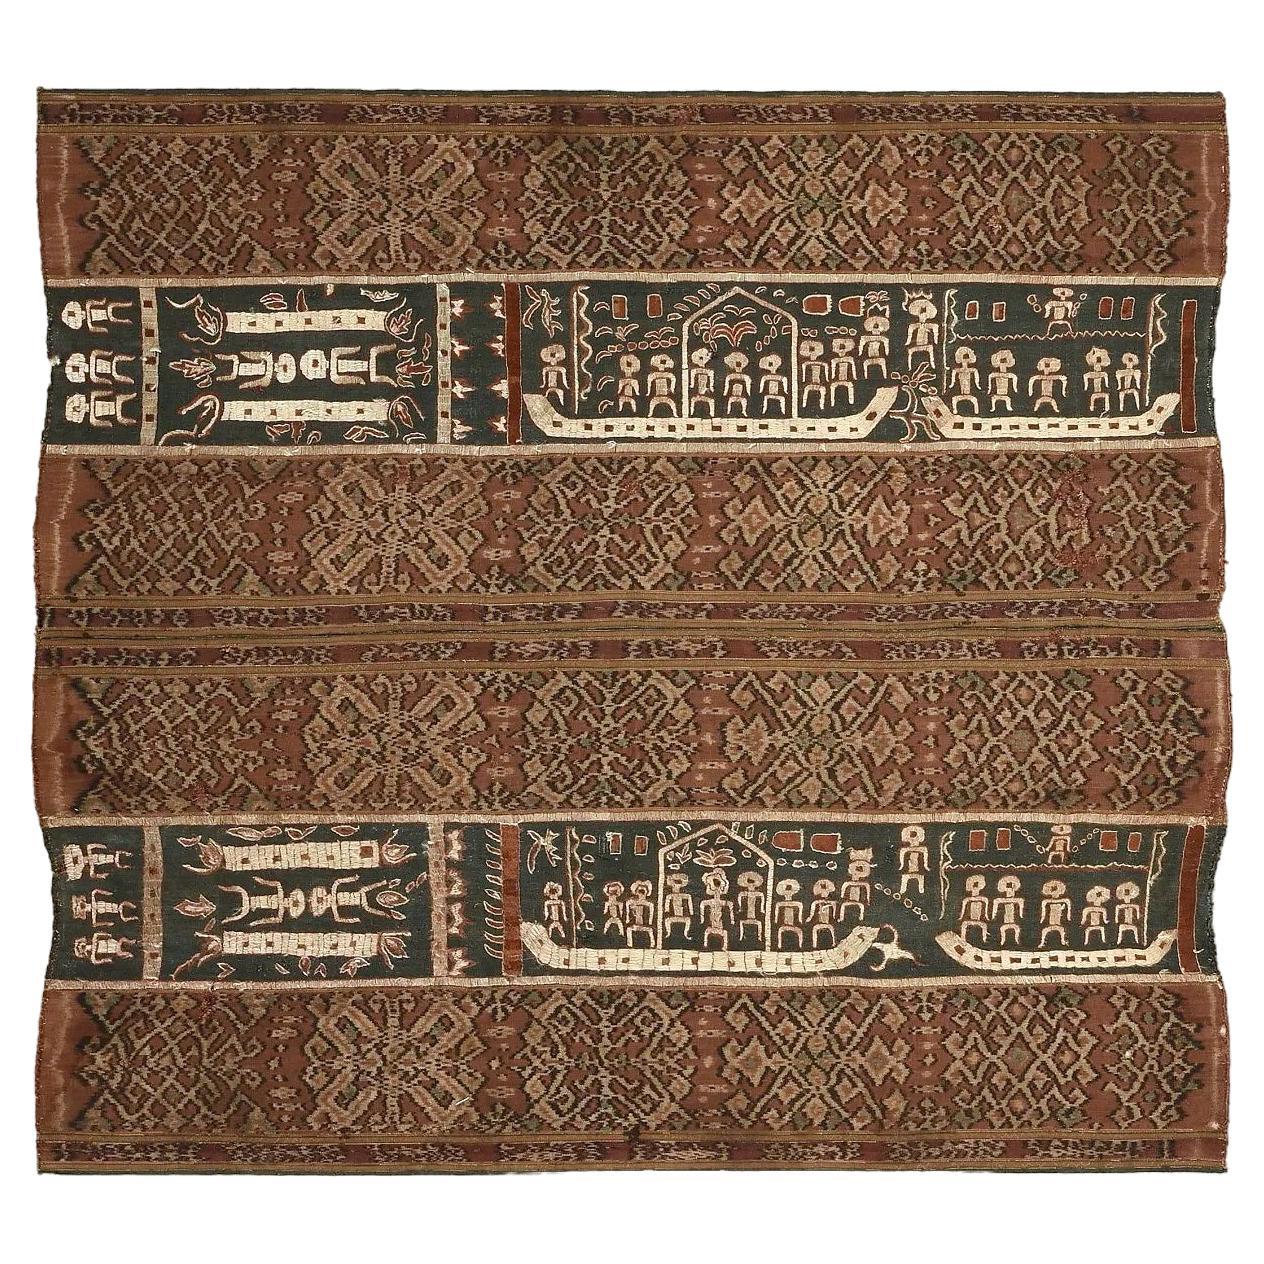 Ikat and Embroidery Textile Panel from Sumatra Indonesia